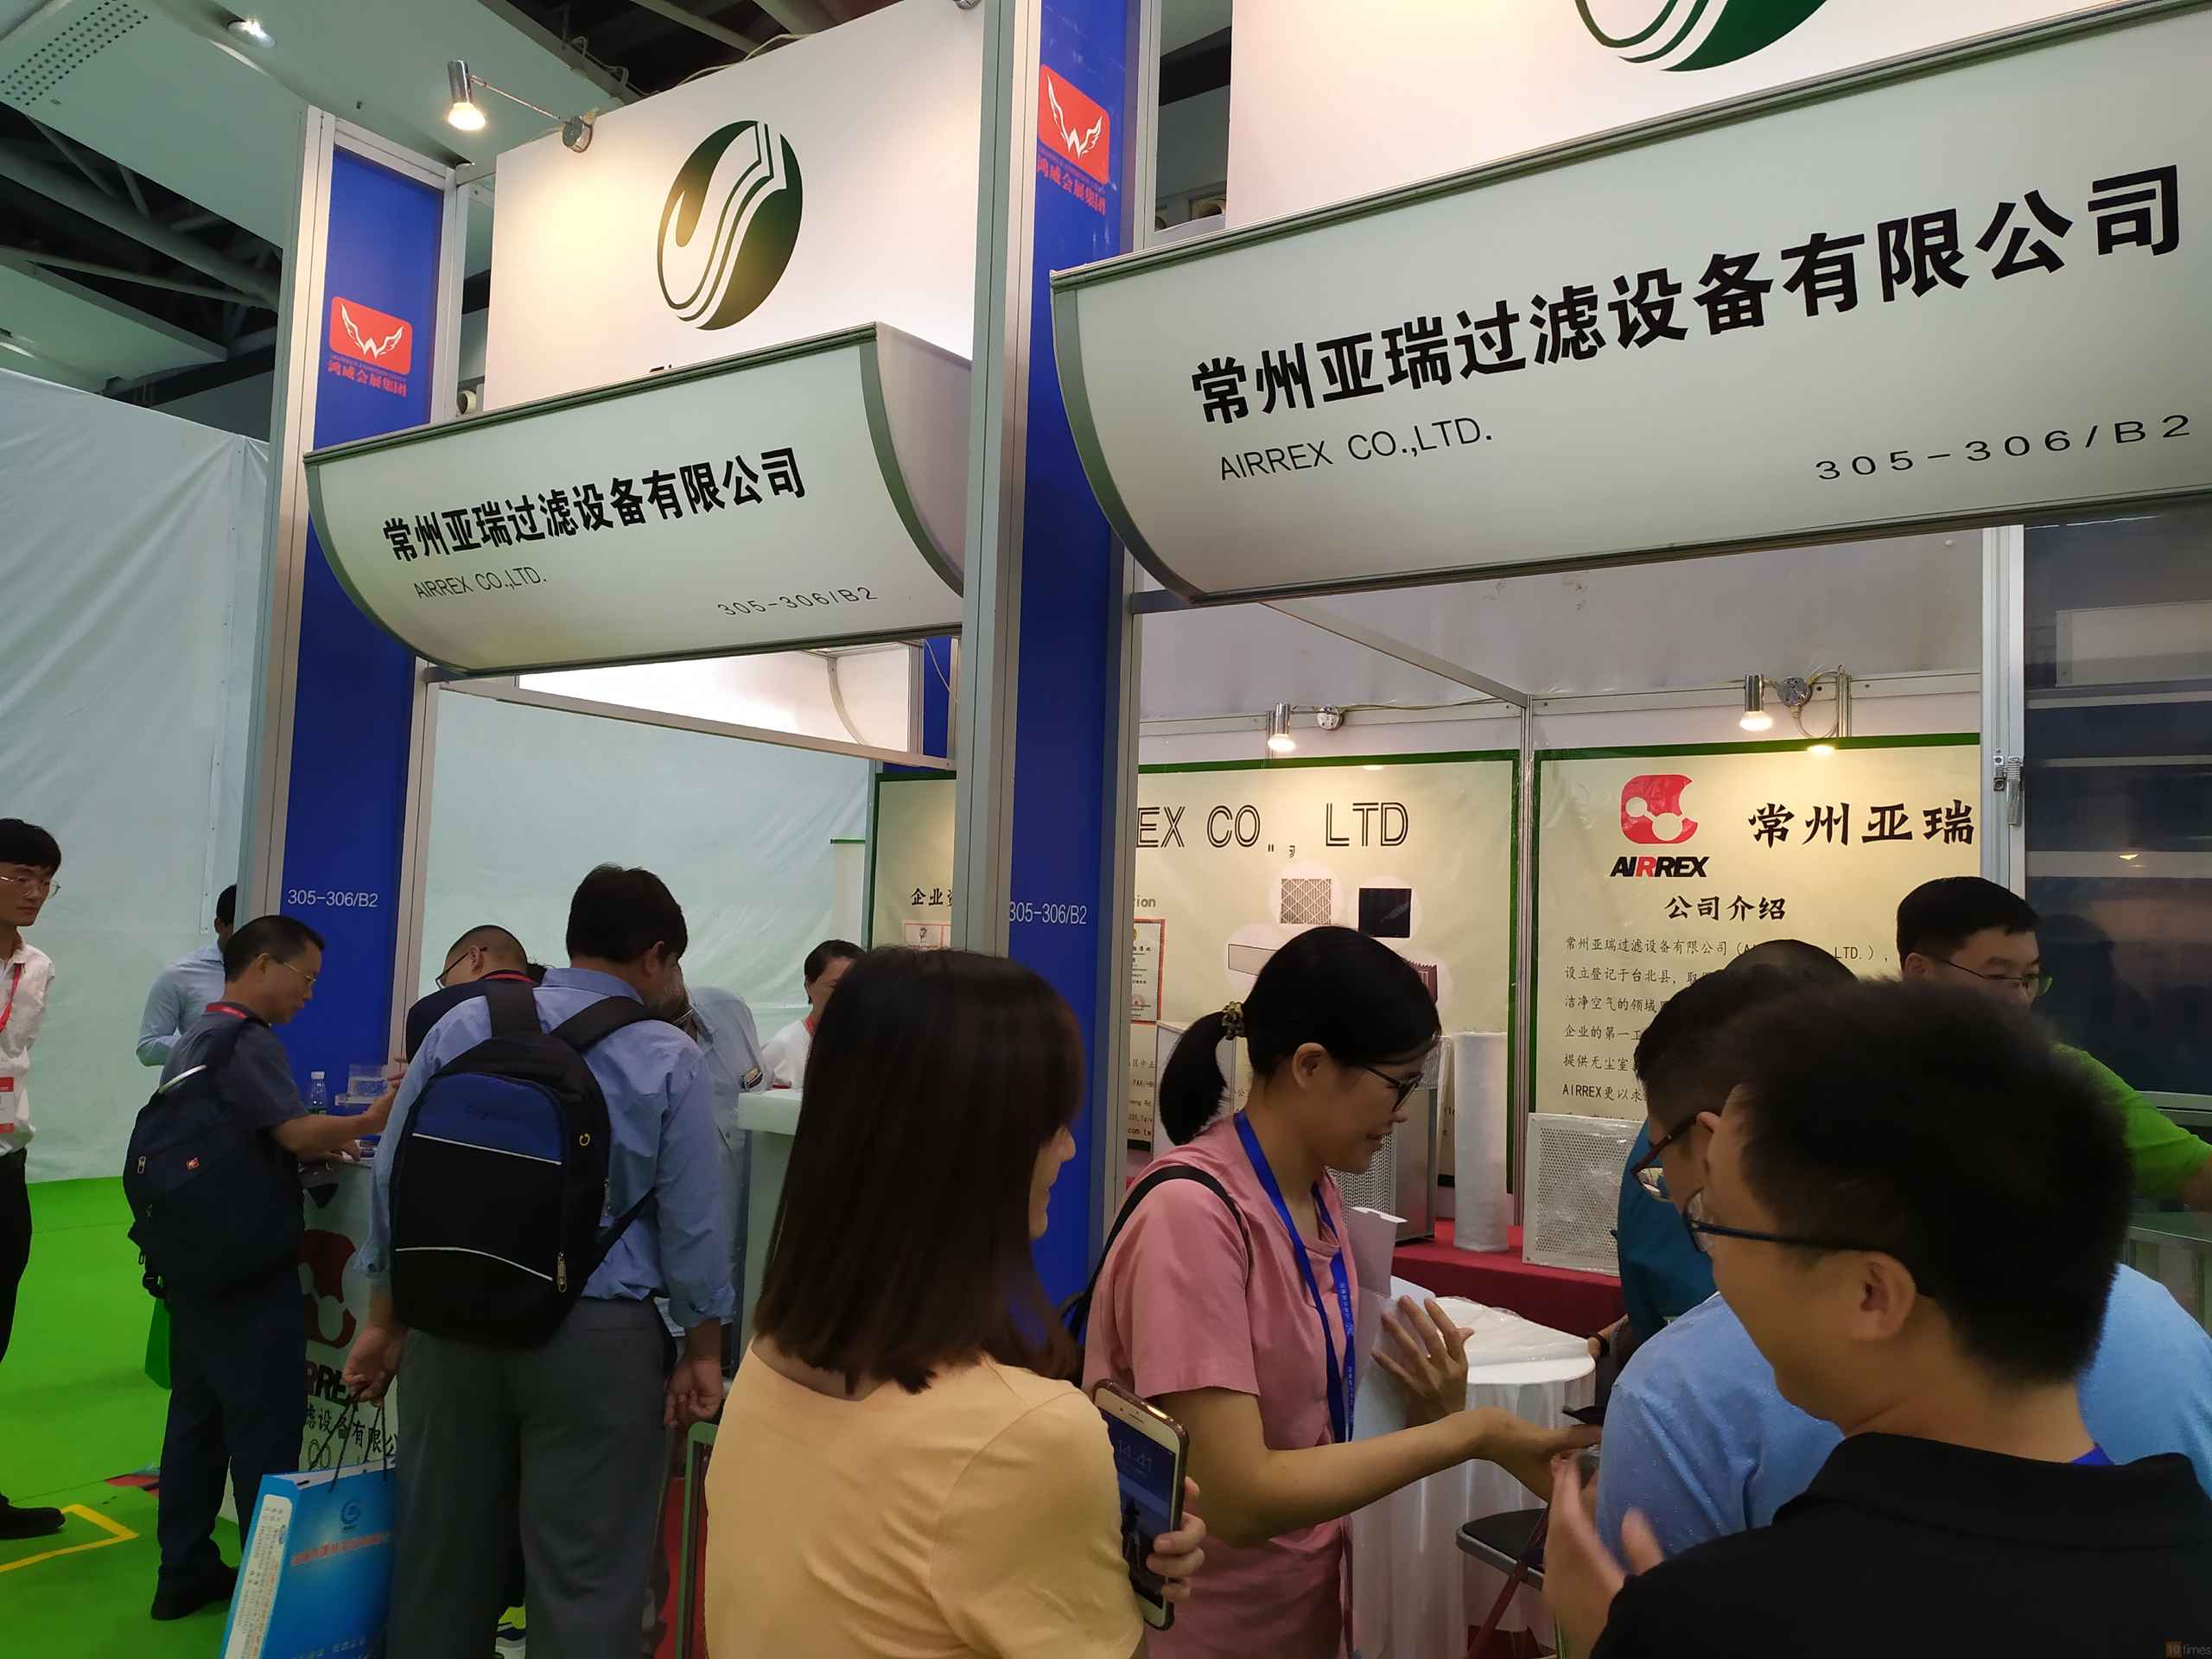 Cleanroom Guangzhou Exhibition (Aug 2024), Asia Pacific Cleanroom